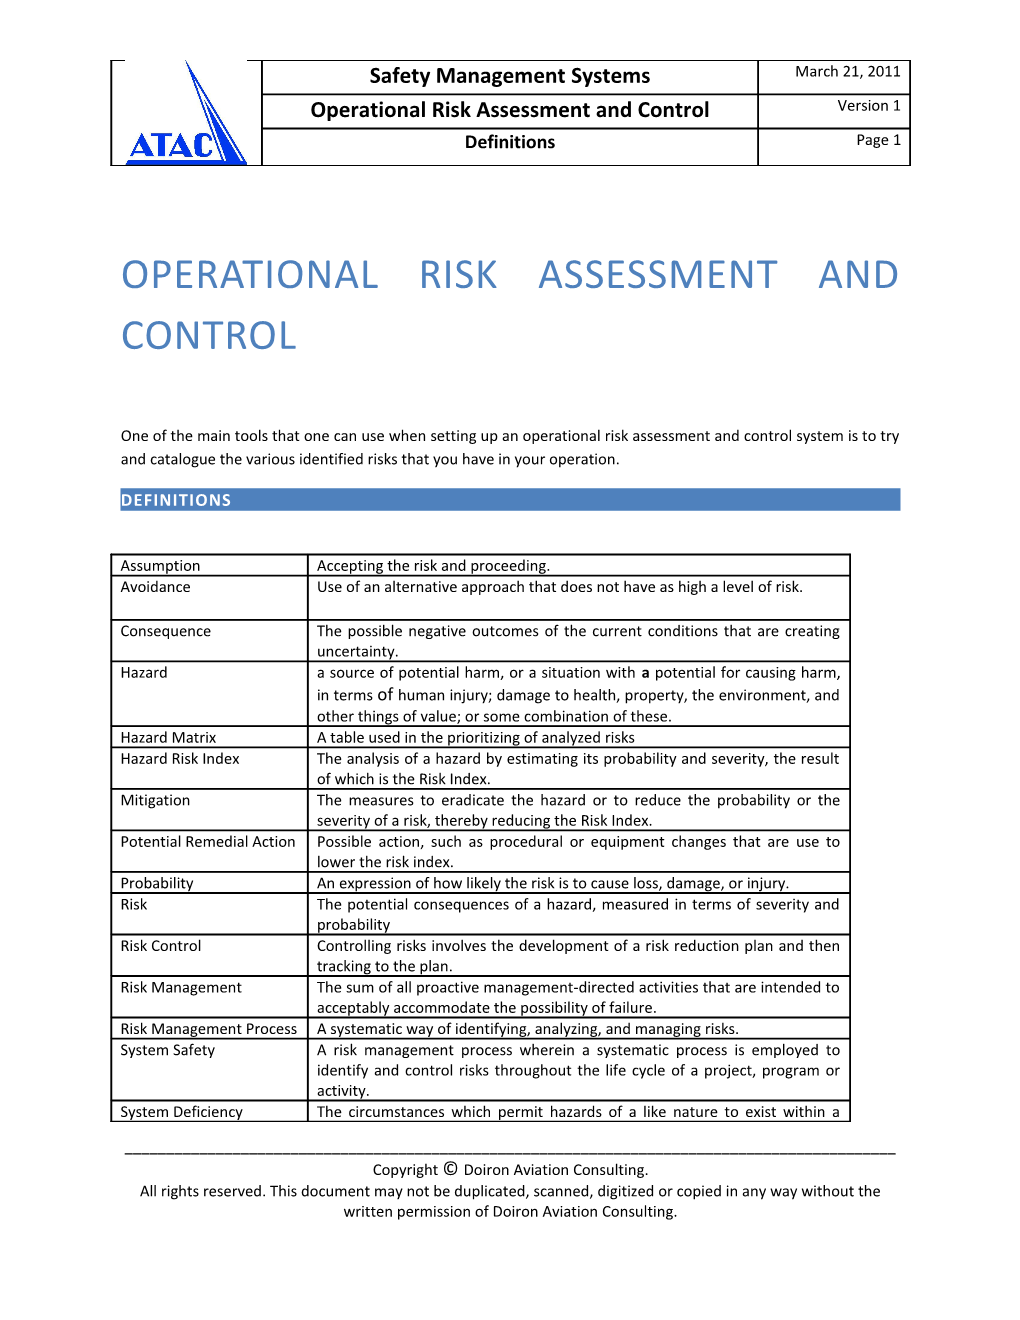 Operational Risk Assessment and Control